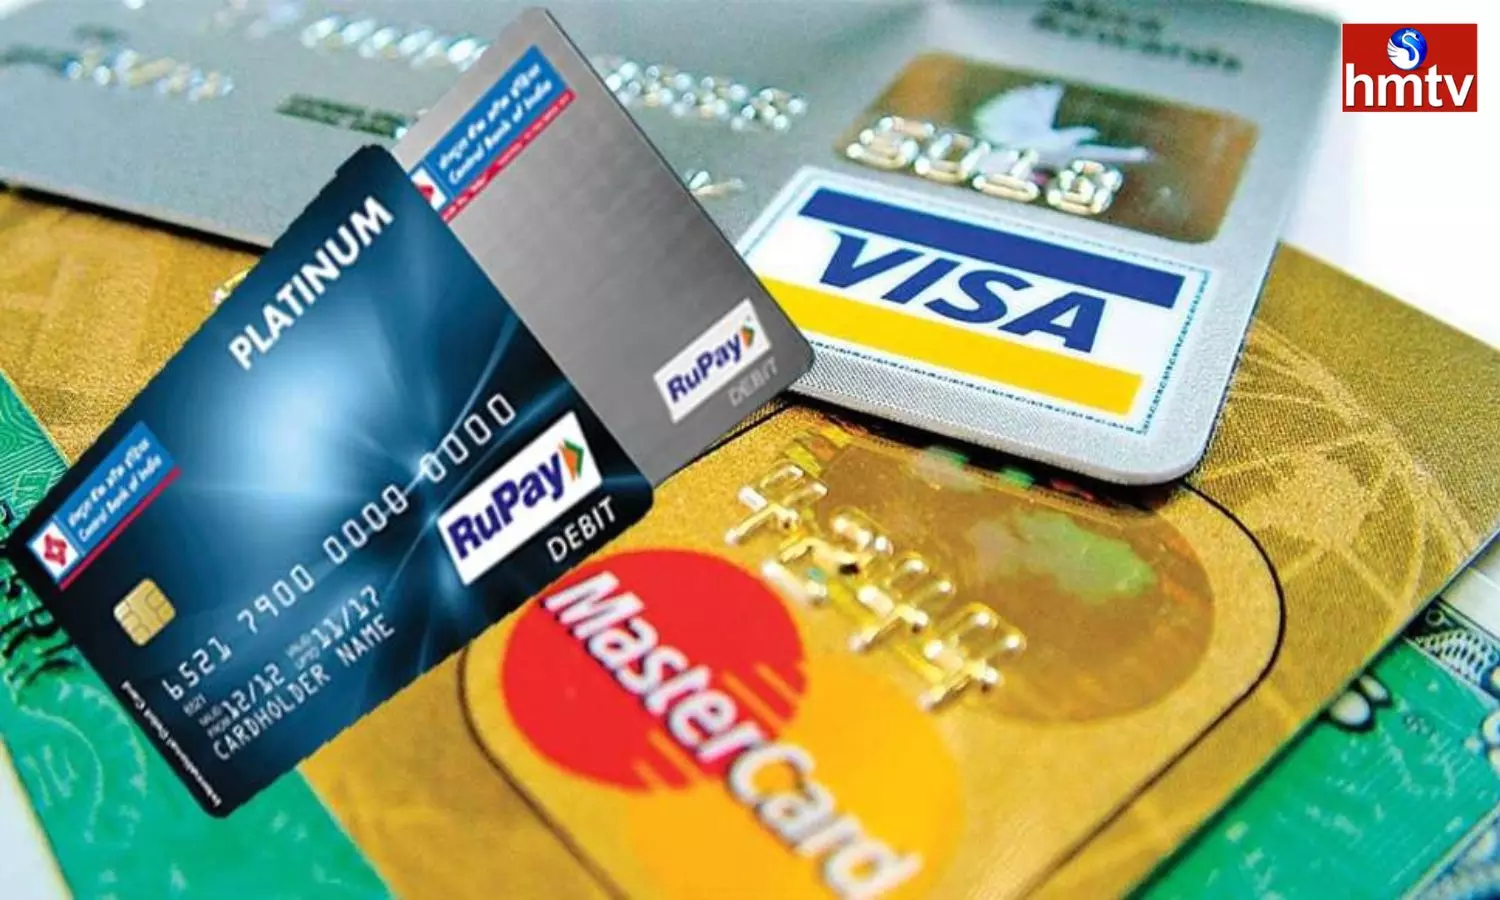 RuPay Or Visa, Master Which Card Is Better? Do You Know Why Banks Actually Issue Different Cards?